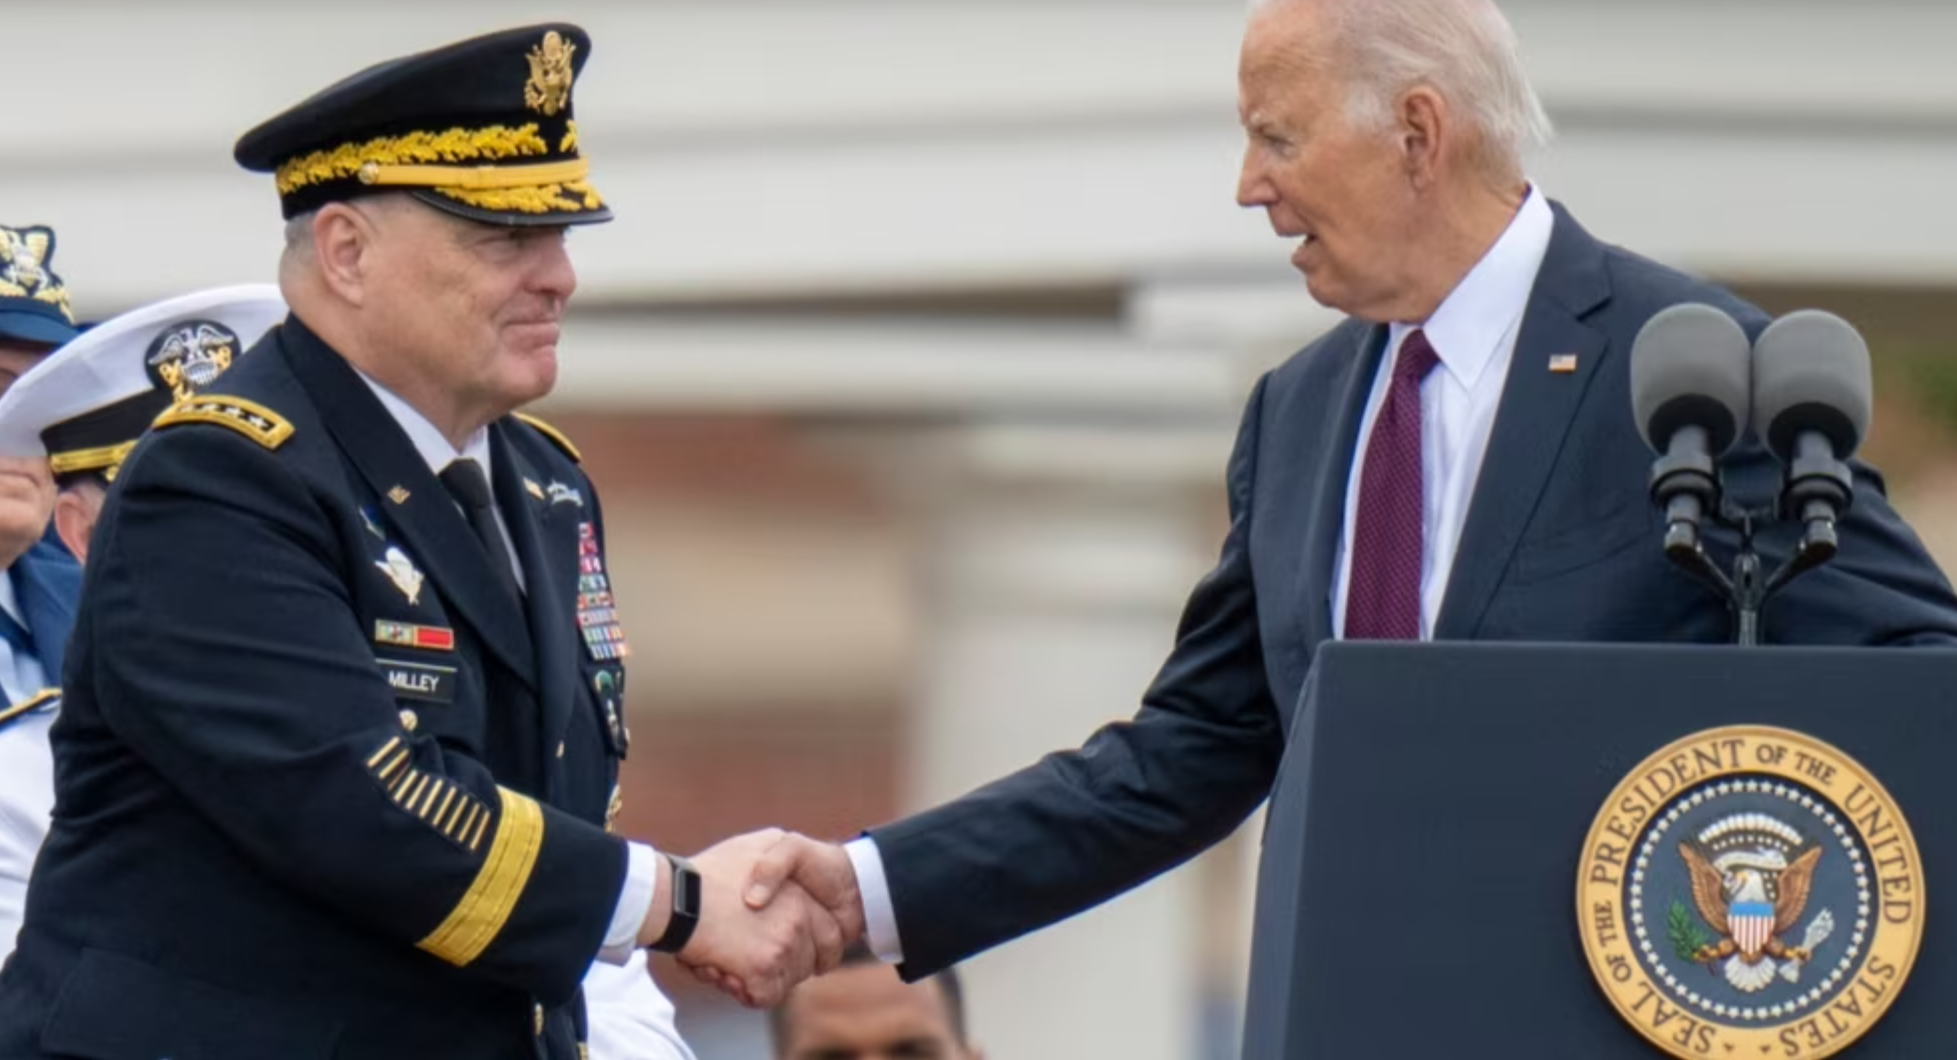 Retiring Leader Says US Military Will Defend Constitution, not a ‘Wannabe Dictator’